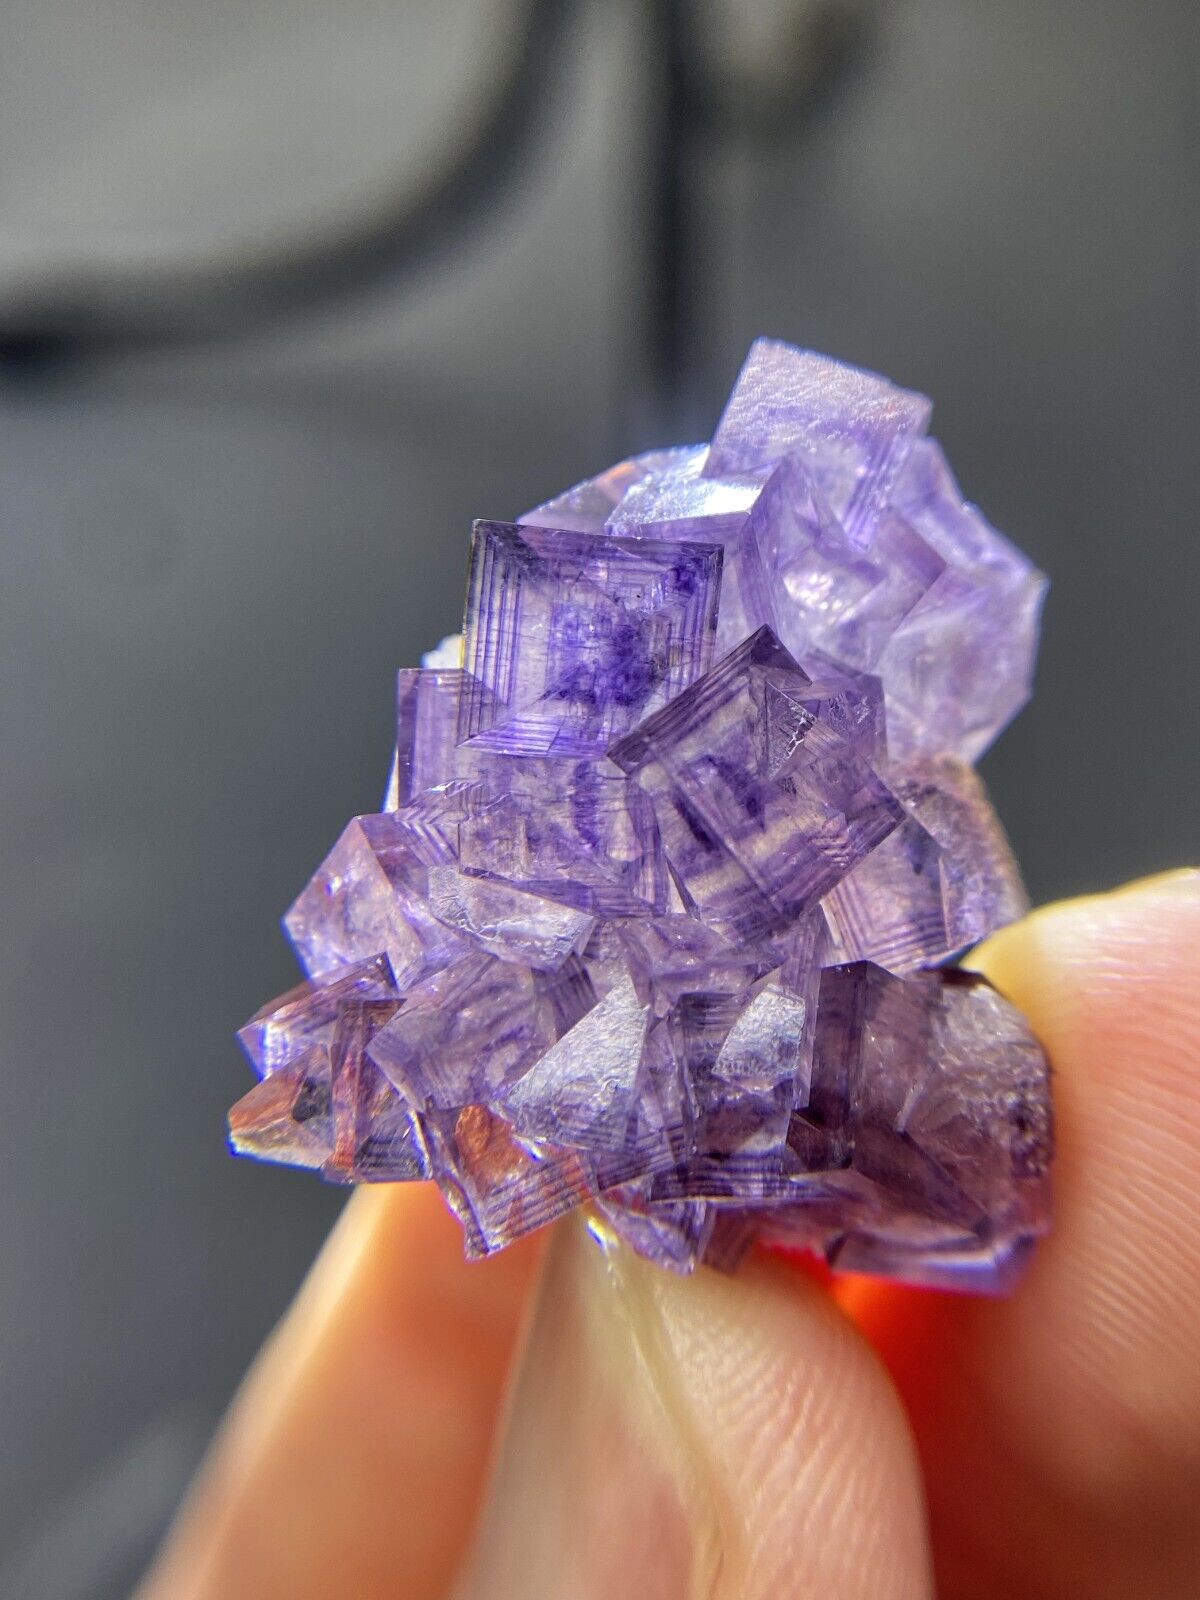 Rare exquisite natural multi-layer purple window cubic fluorite mineral crystal